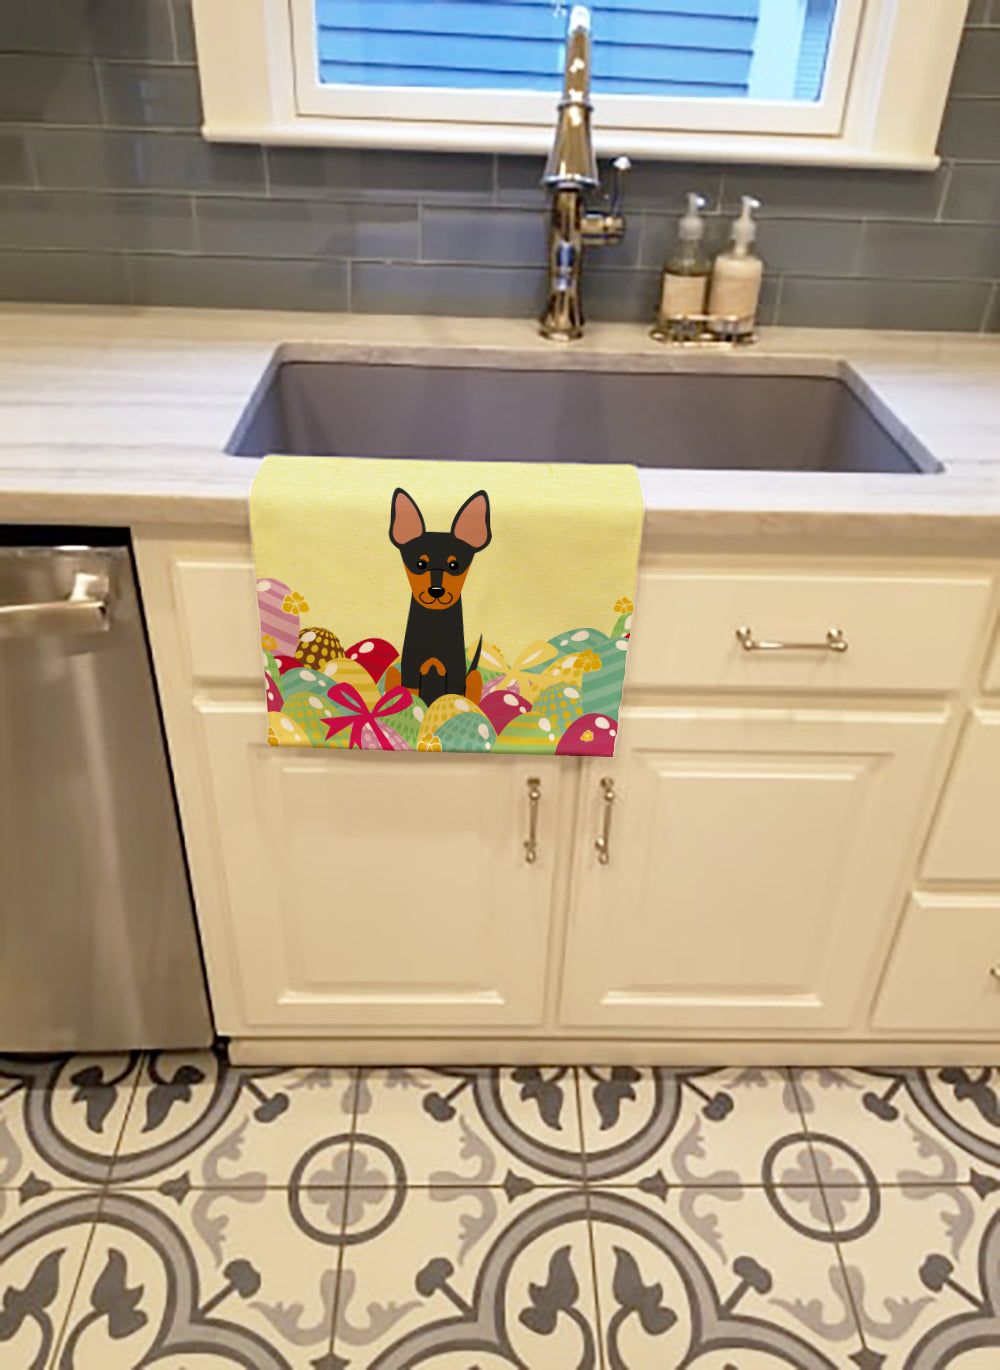 Easter Eggs English Toy Terrier Kitchen Towel BB6109KTWL - the-store.com